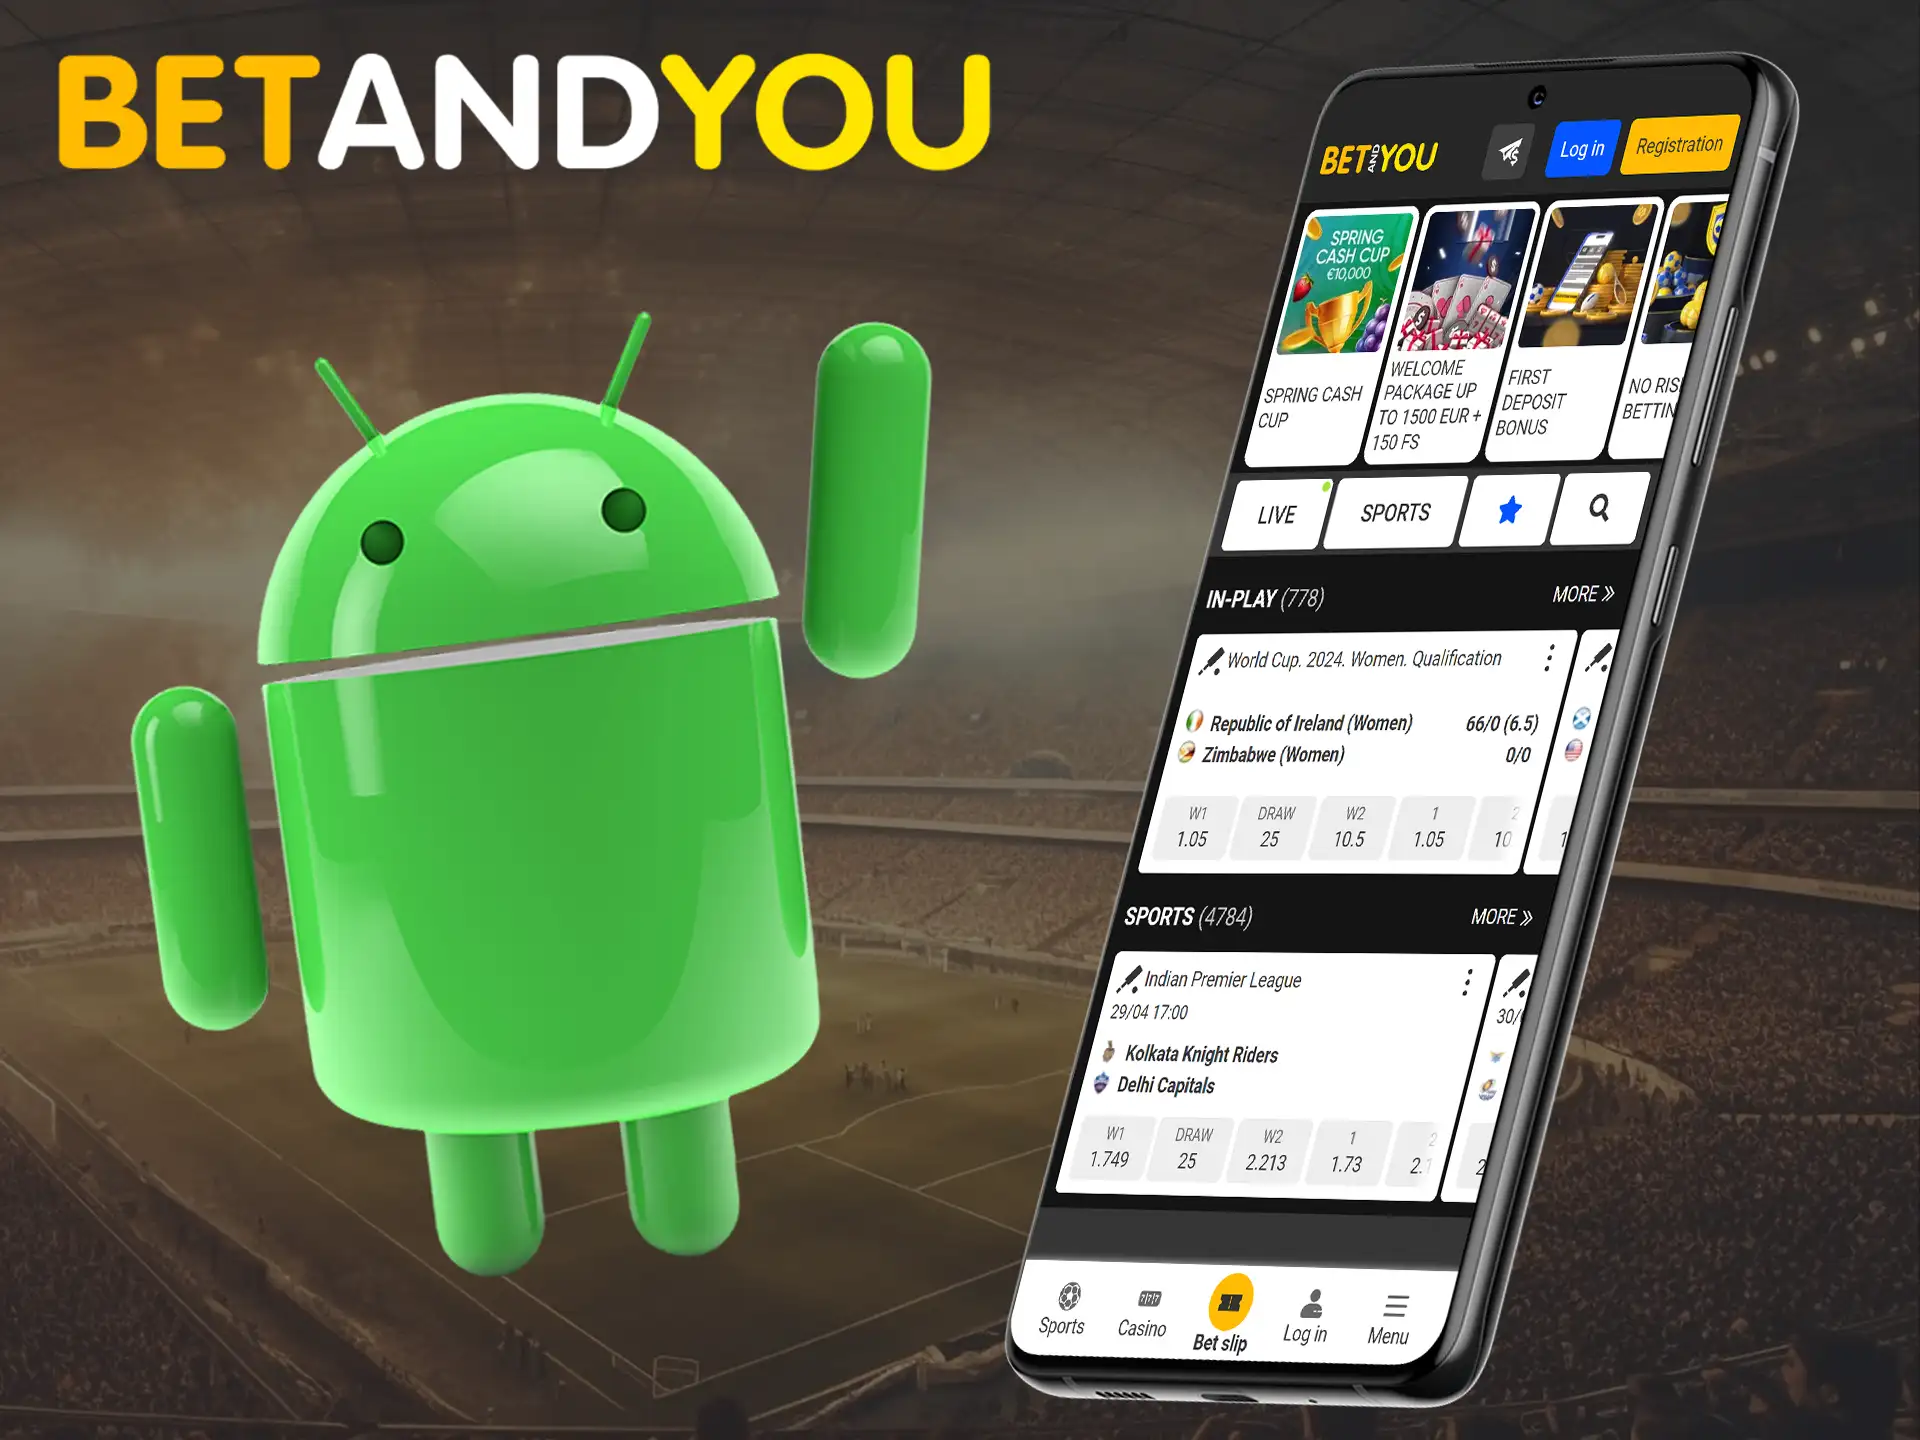 Especially for users of Android devices, Betandyou has developed its own mobile application that allows you to access all bookmaker services right at your fingertips.